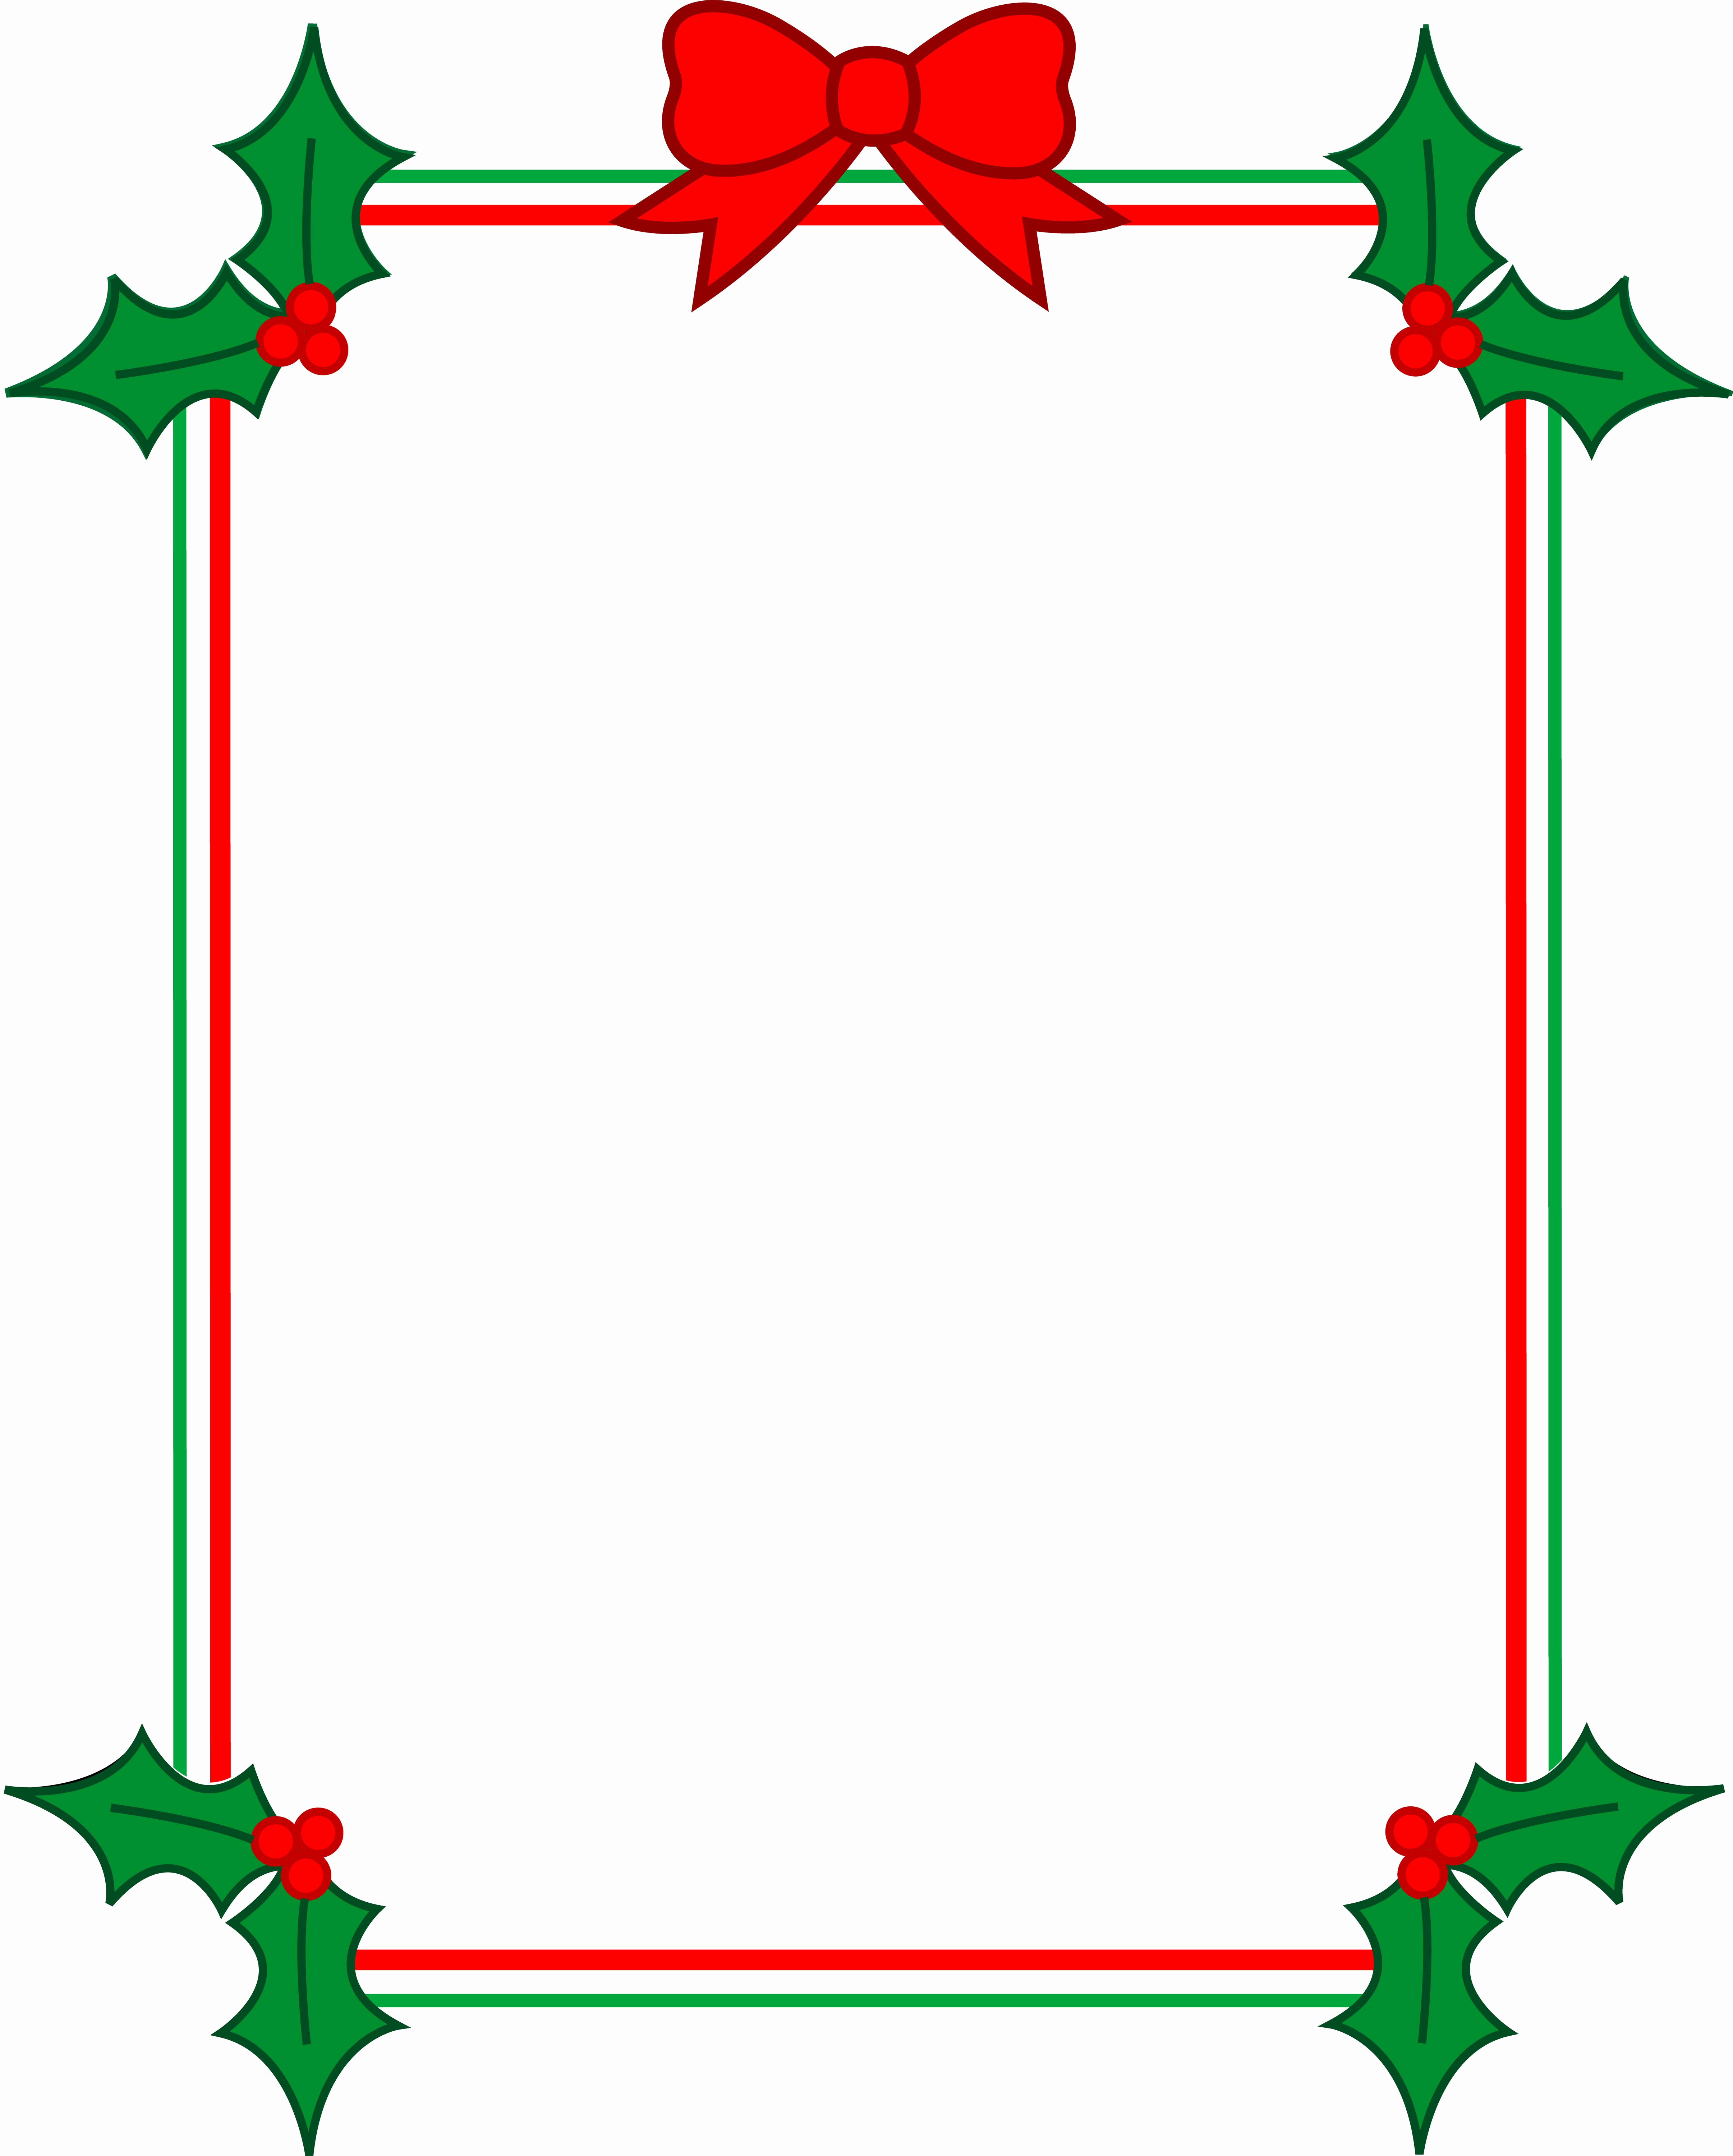 022 Free Christmas Stationerymplates For Word Inspireacute.